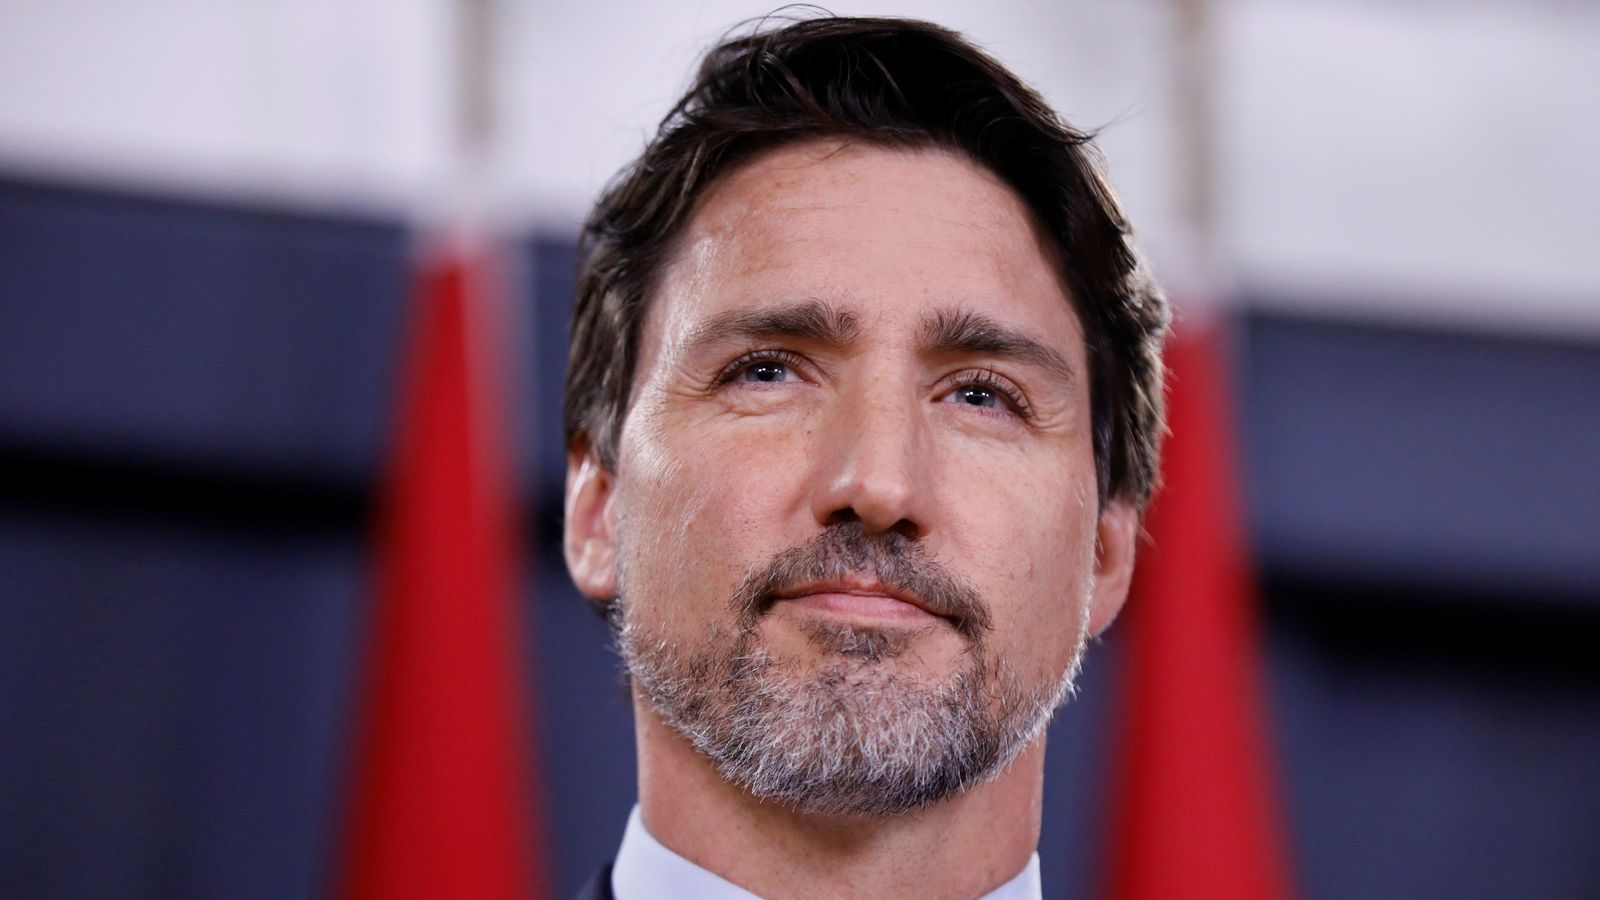 Justin Trudeau: Canadian PM called by prankster impersonating Greta Thunberg